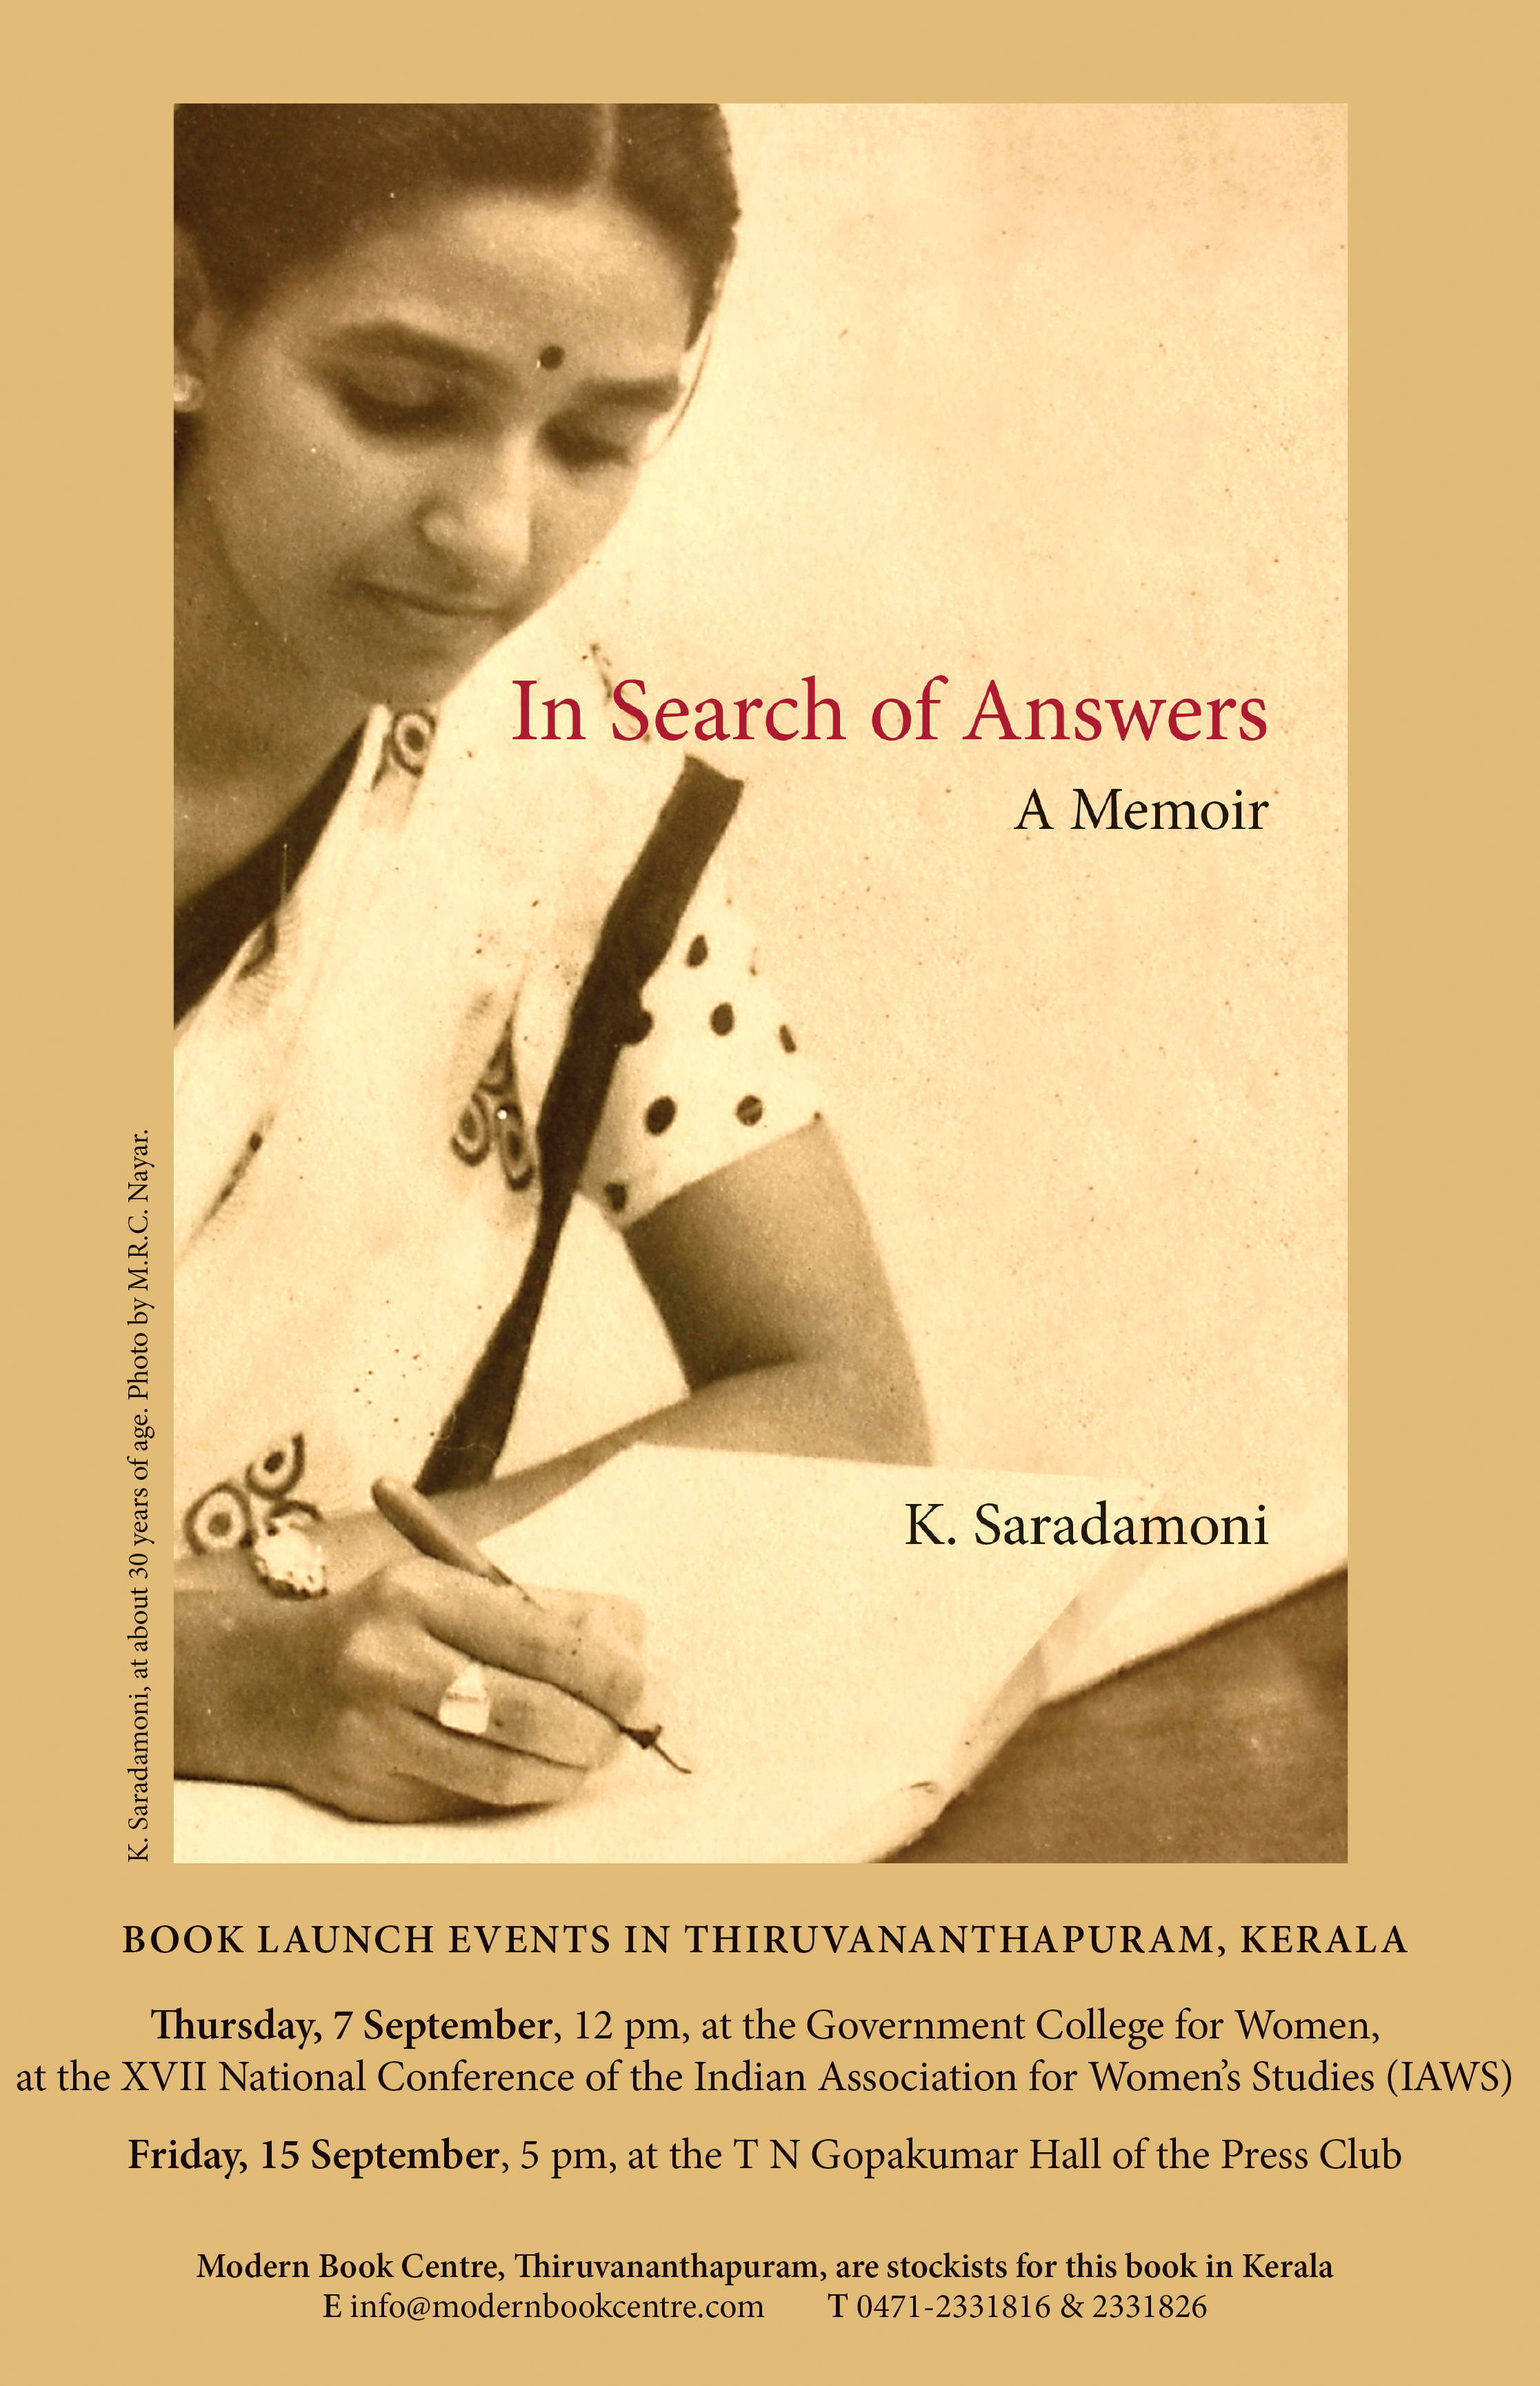 IN SEARCH OF ANSWERS, K. Saradamoni's Memoire: Book Launch events in Kerala on 7 and 15 September